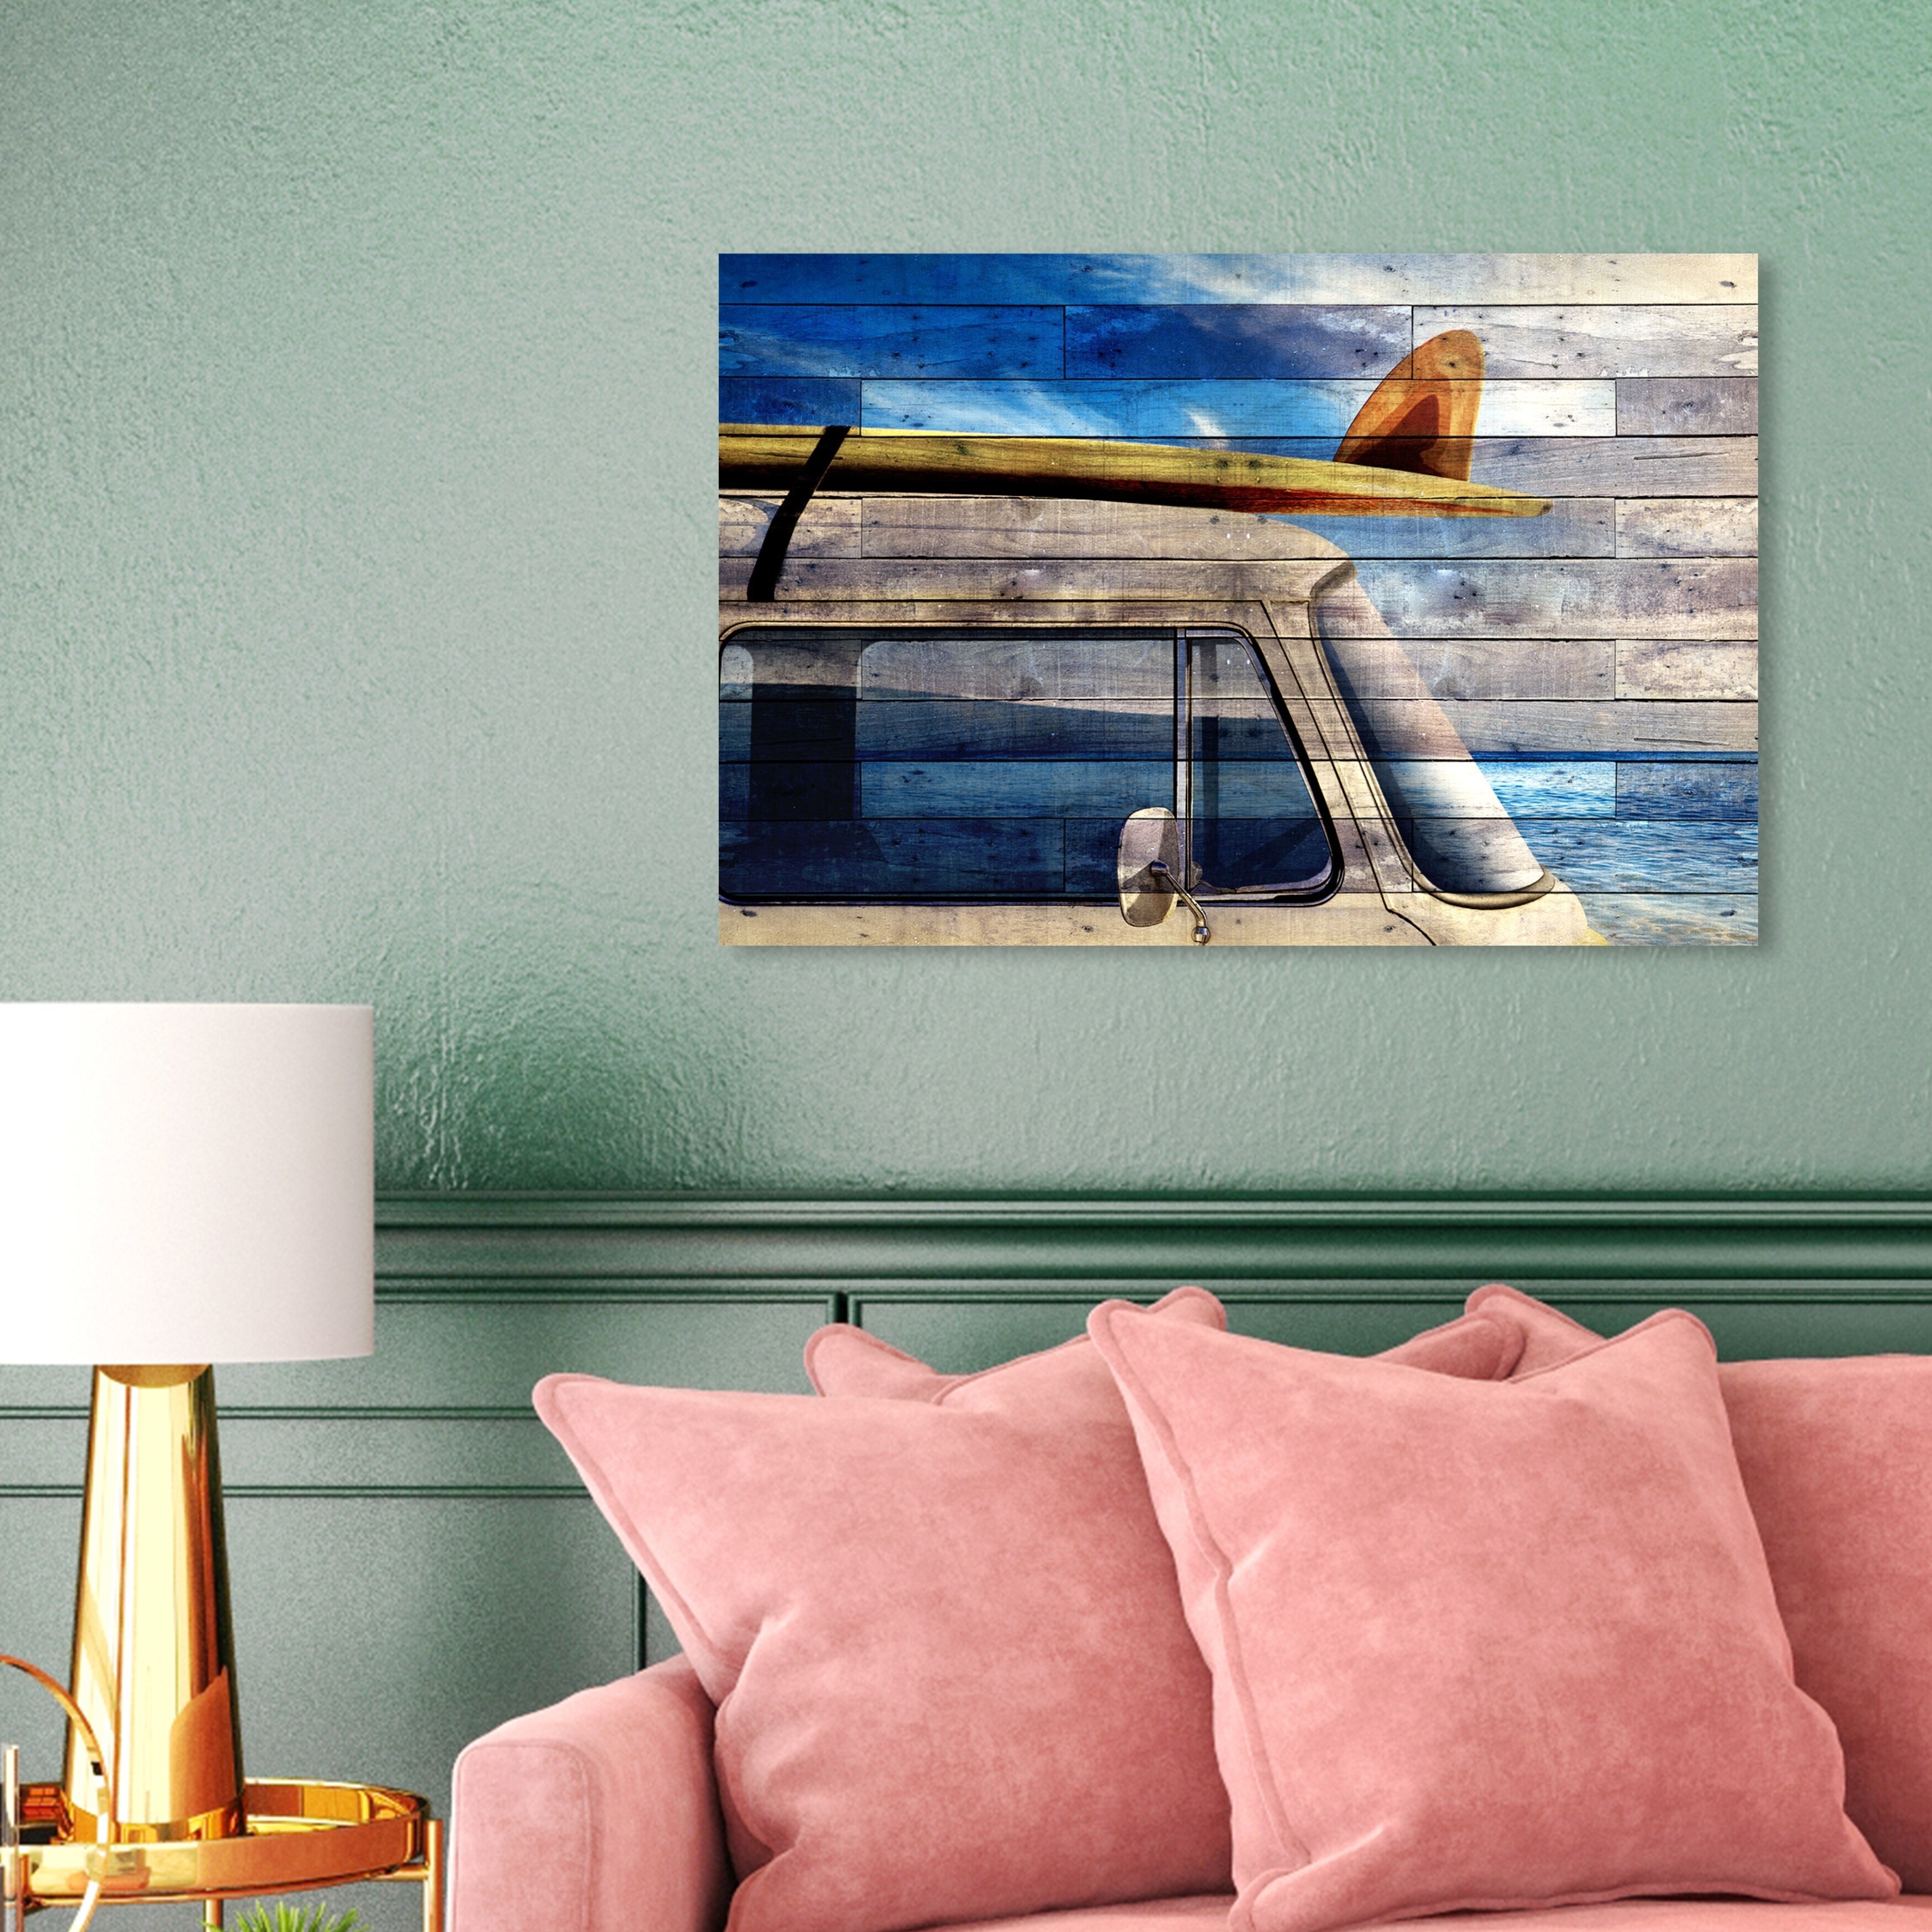 https://ak1.ostkcdn.com/images/products/28585292/Oliver-Gal-Lets-Go-To-The-Beach-Nautical-and-Coastal-Wall-Art-Canvas-Print-Blue-Yellow-151a0633-fccd-45a6-987e-15117403c3e0.jpg